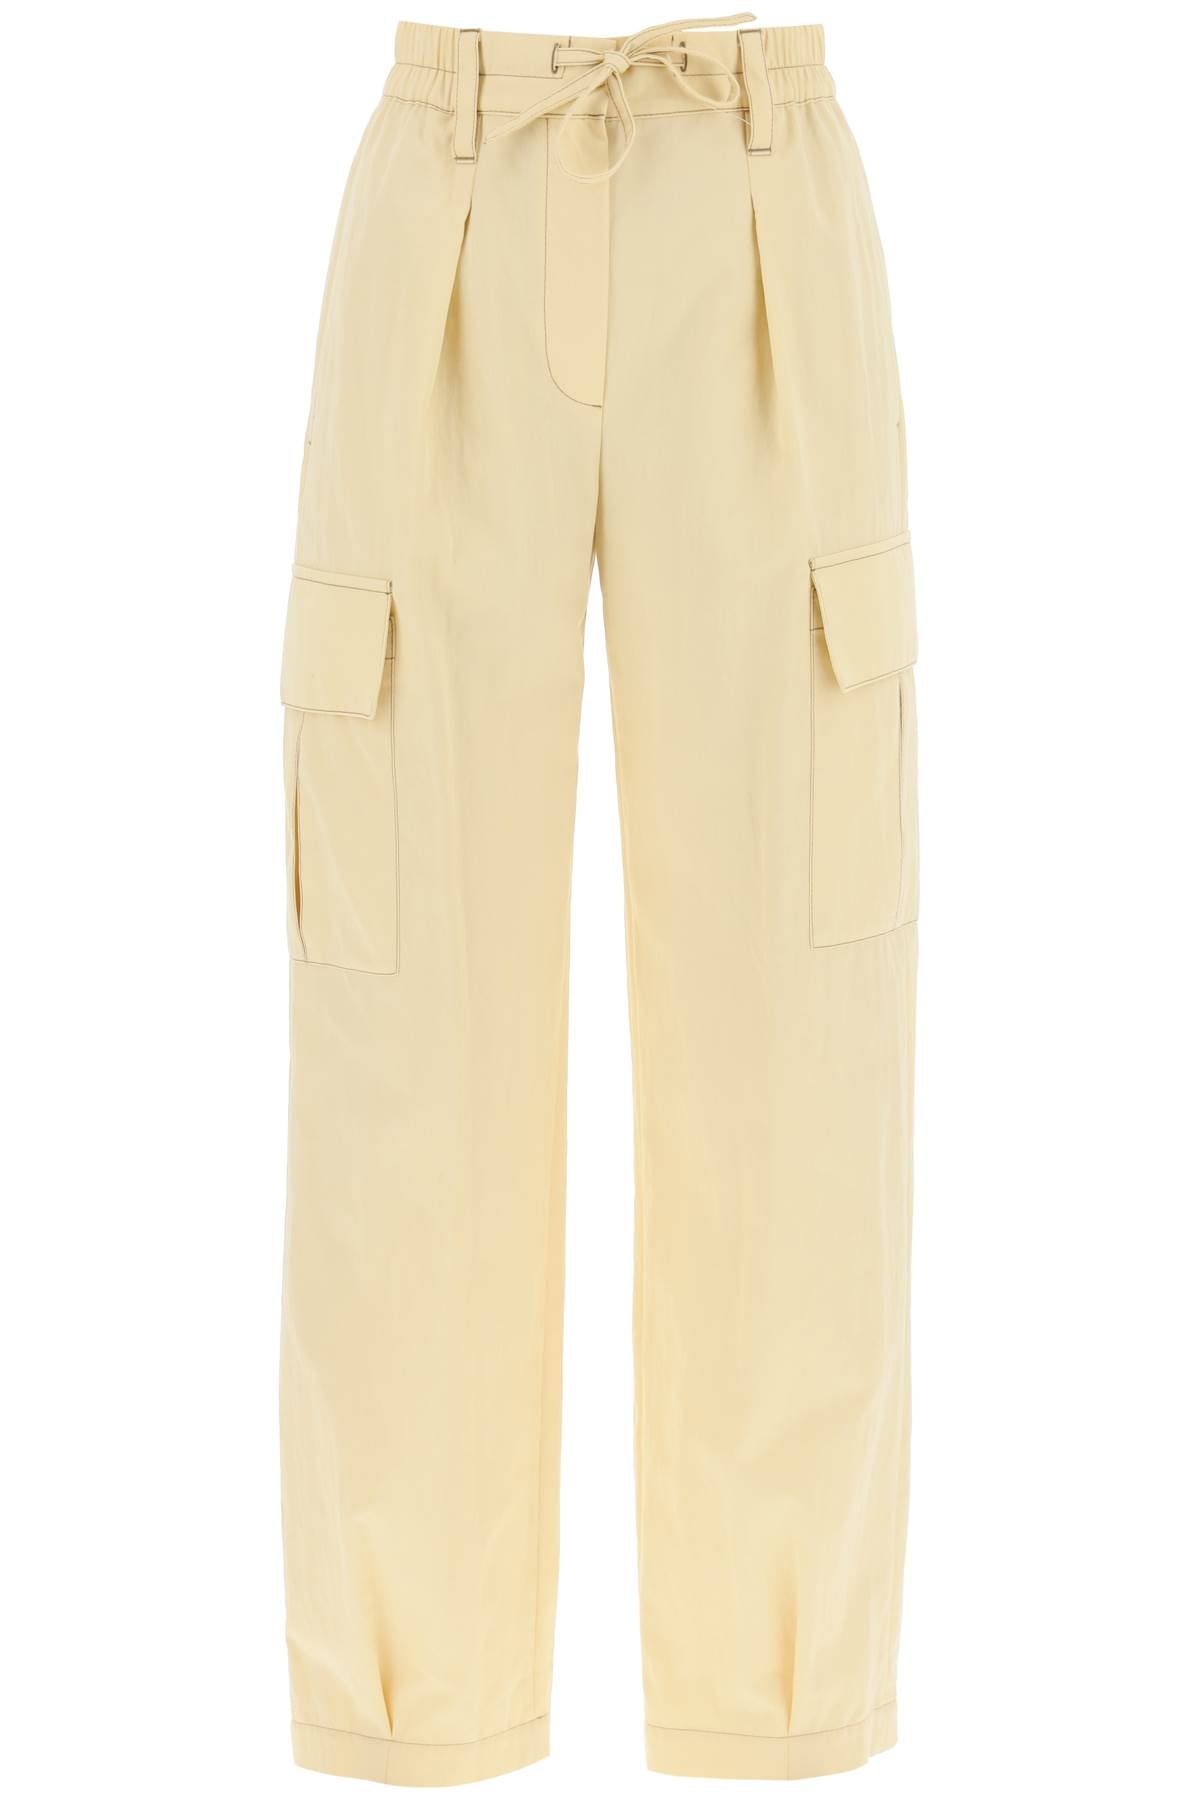 Shop Brunello Cucinelli Yellow Utility Pants With Pockets For Women